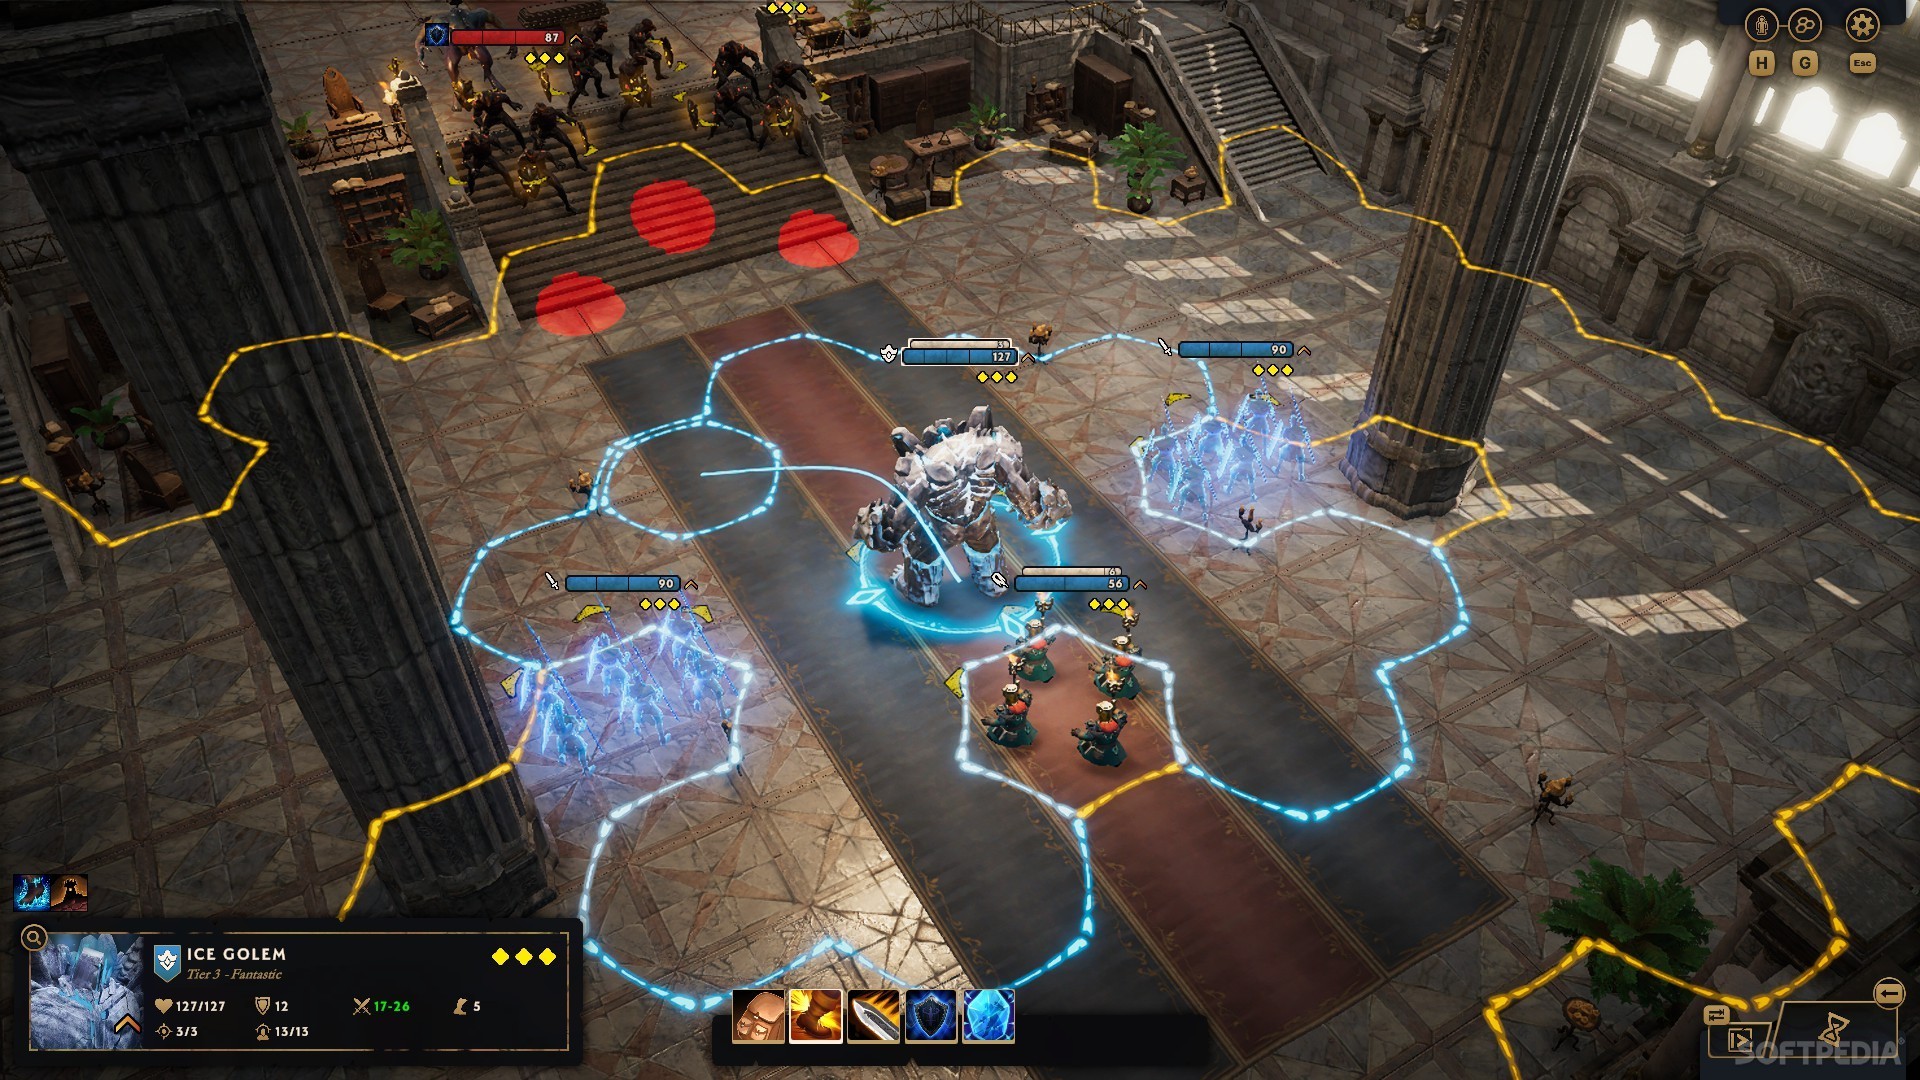 download the new version for windows SpellForce: Conquest of Eo